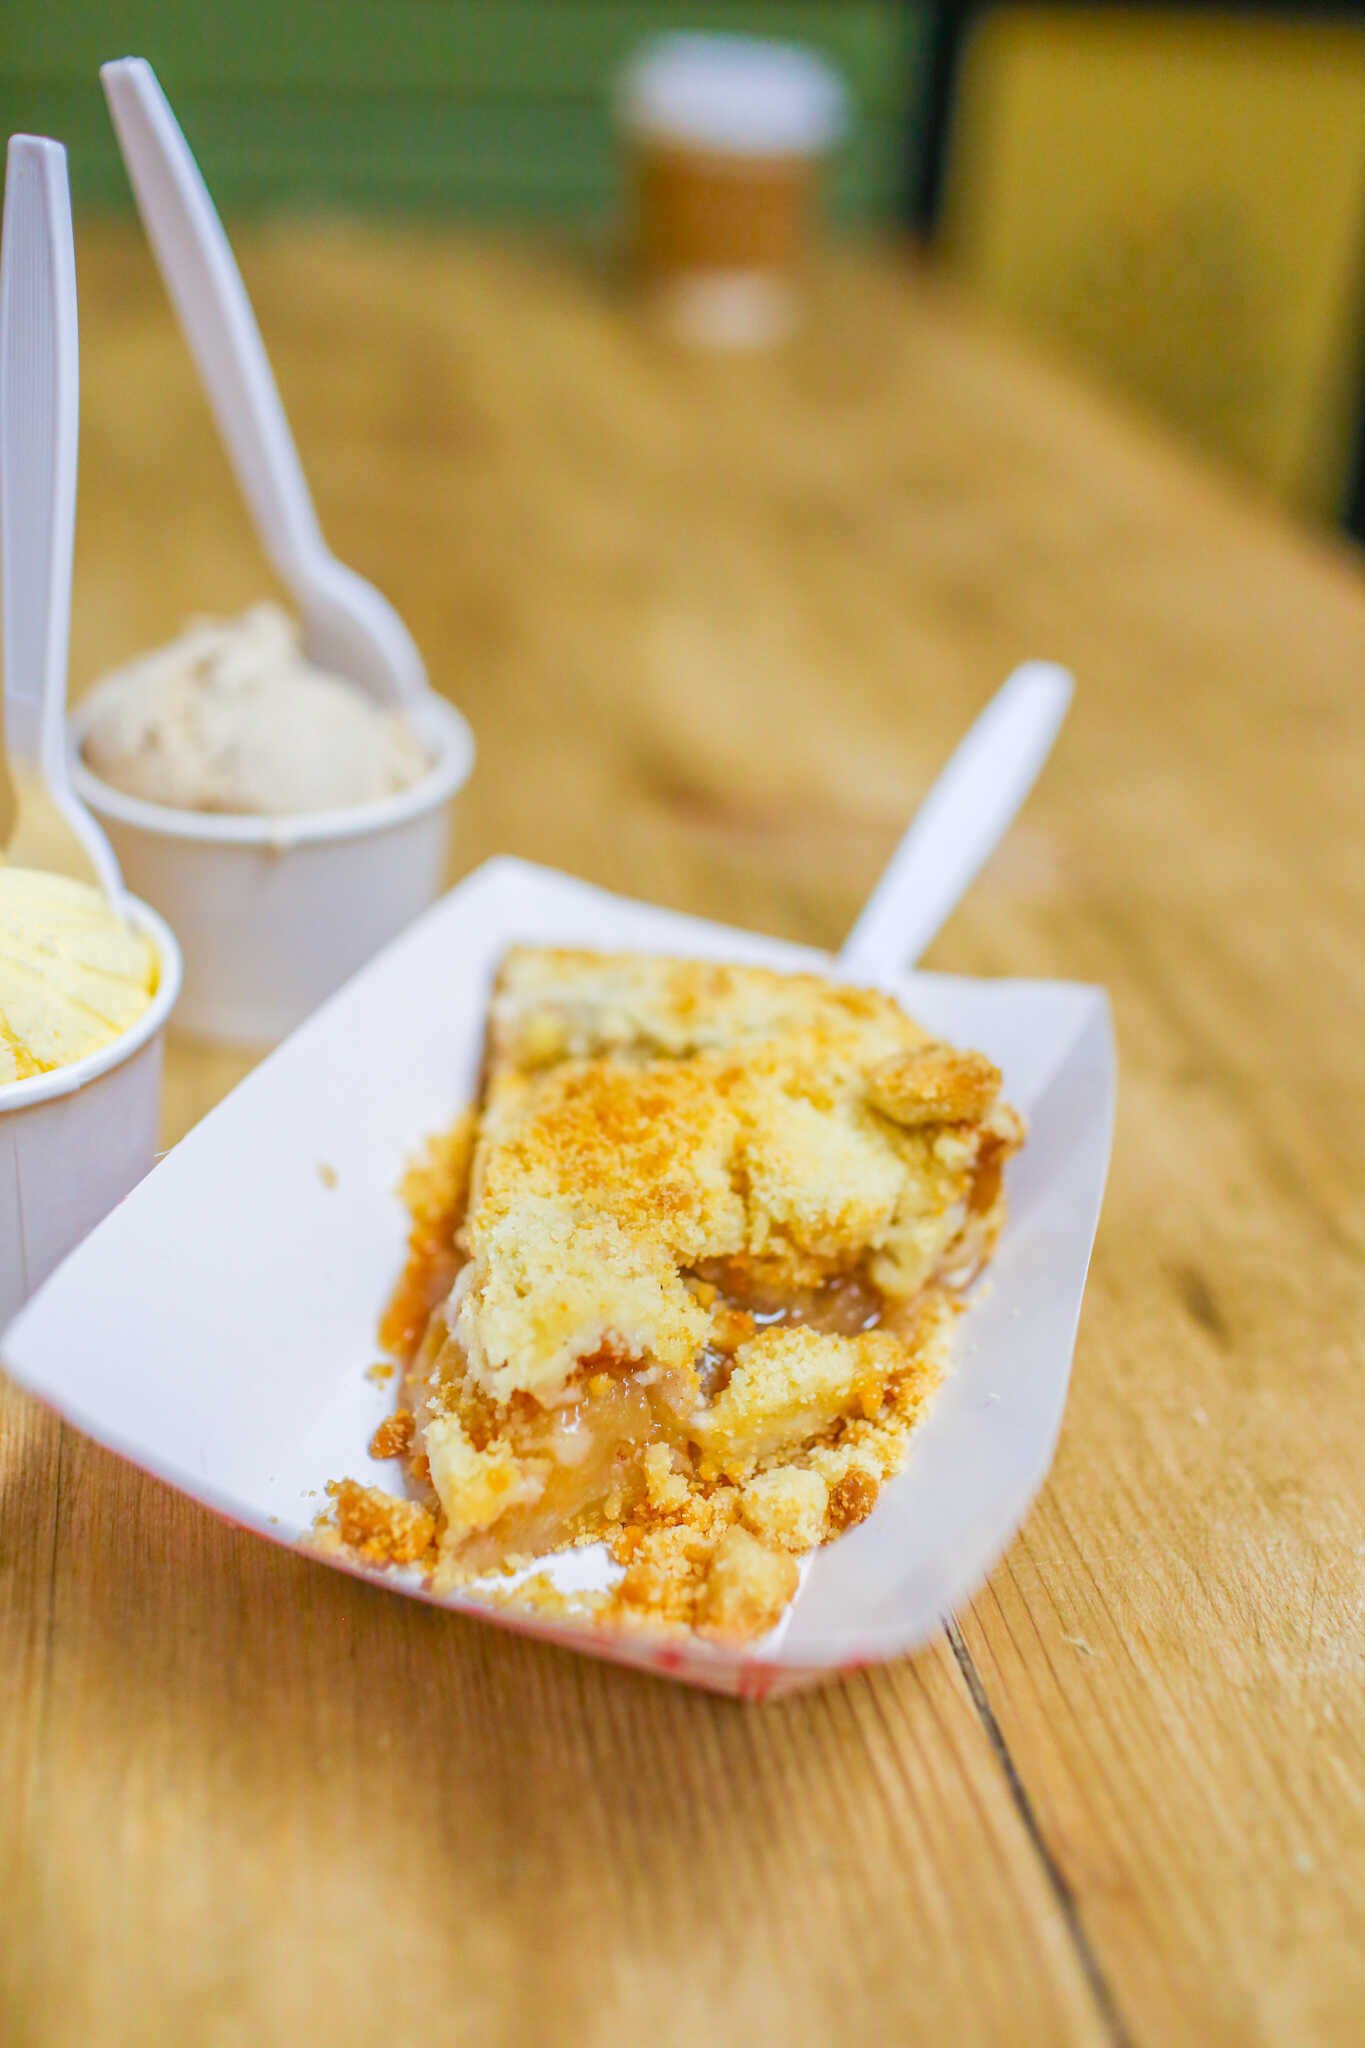 The Complete Travel Guide to Julian, California - Apple crumble pie from Mom’s Pie House.